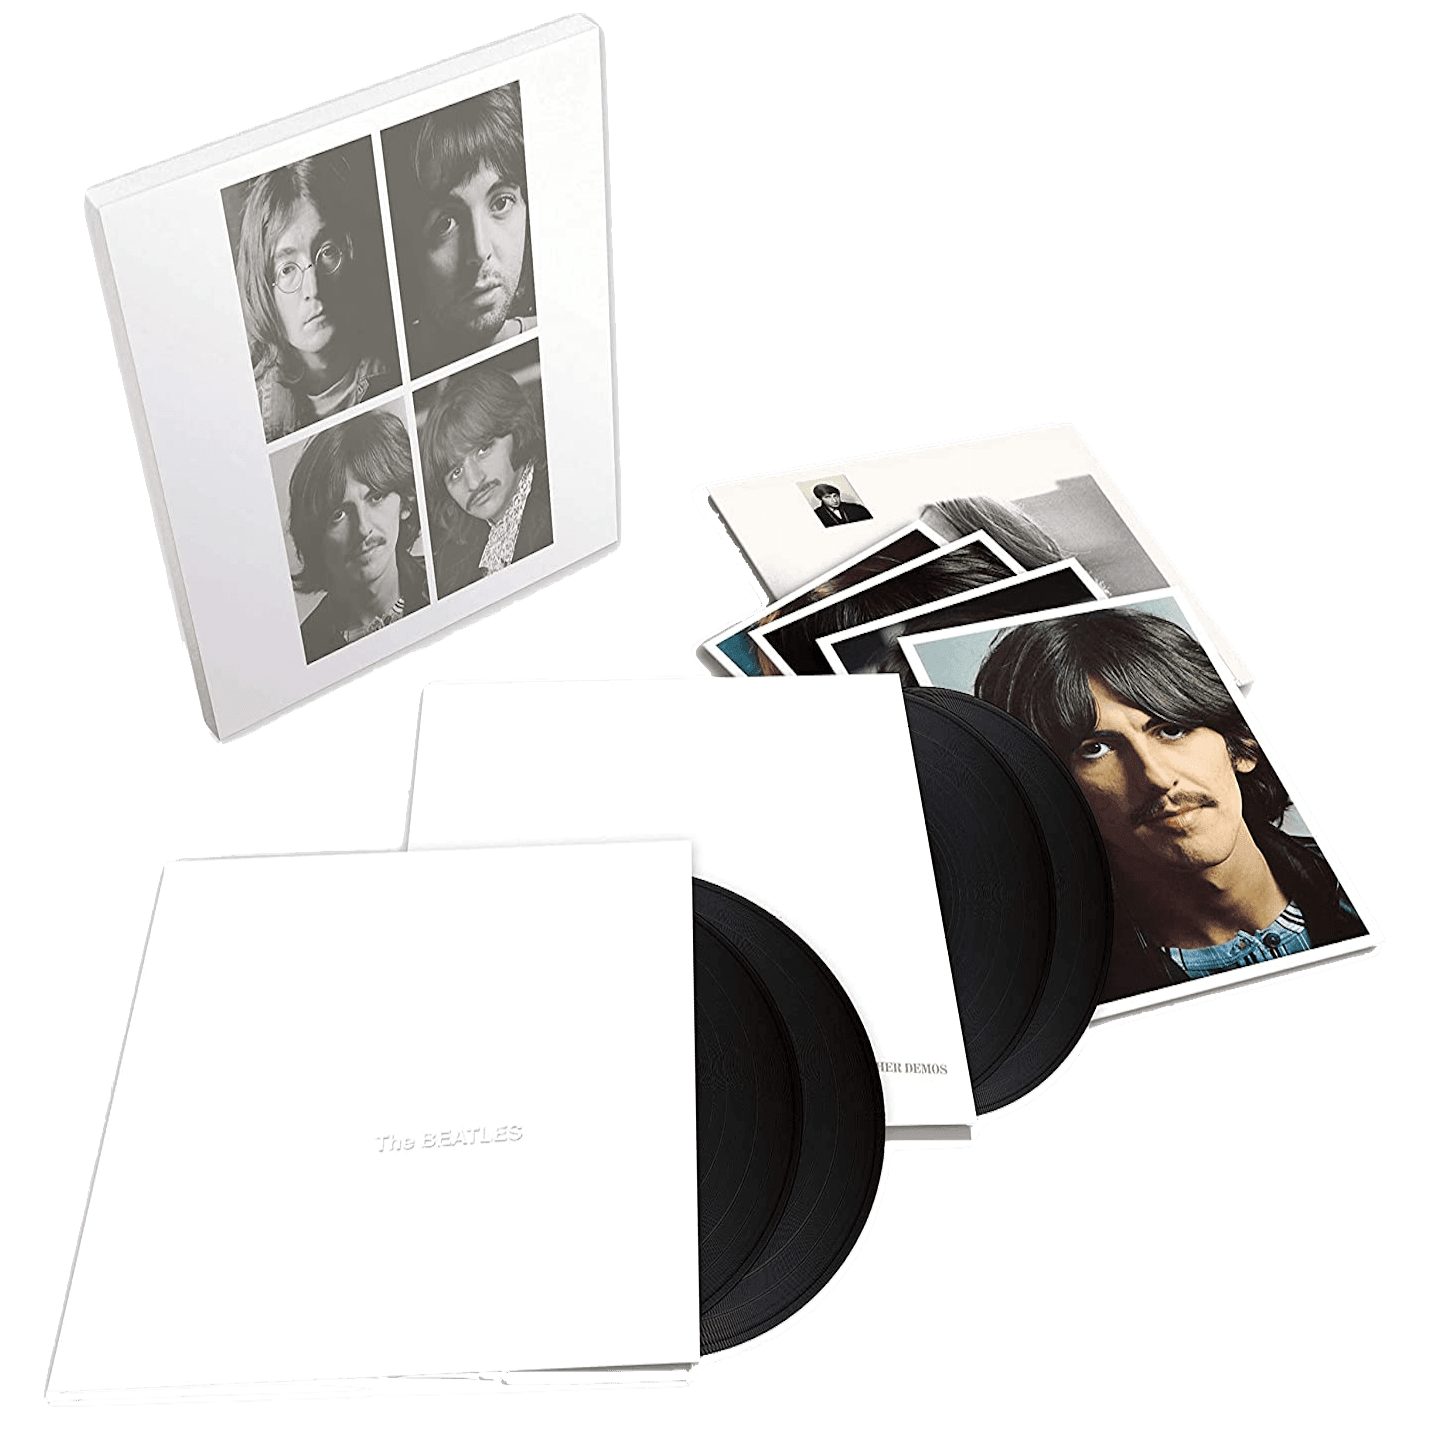 The Beatles - The Beatles (The White Album) + Esher Demos (Limited Edition,  180 Gram) (4 LP)